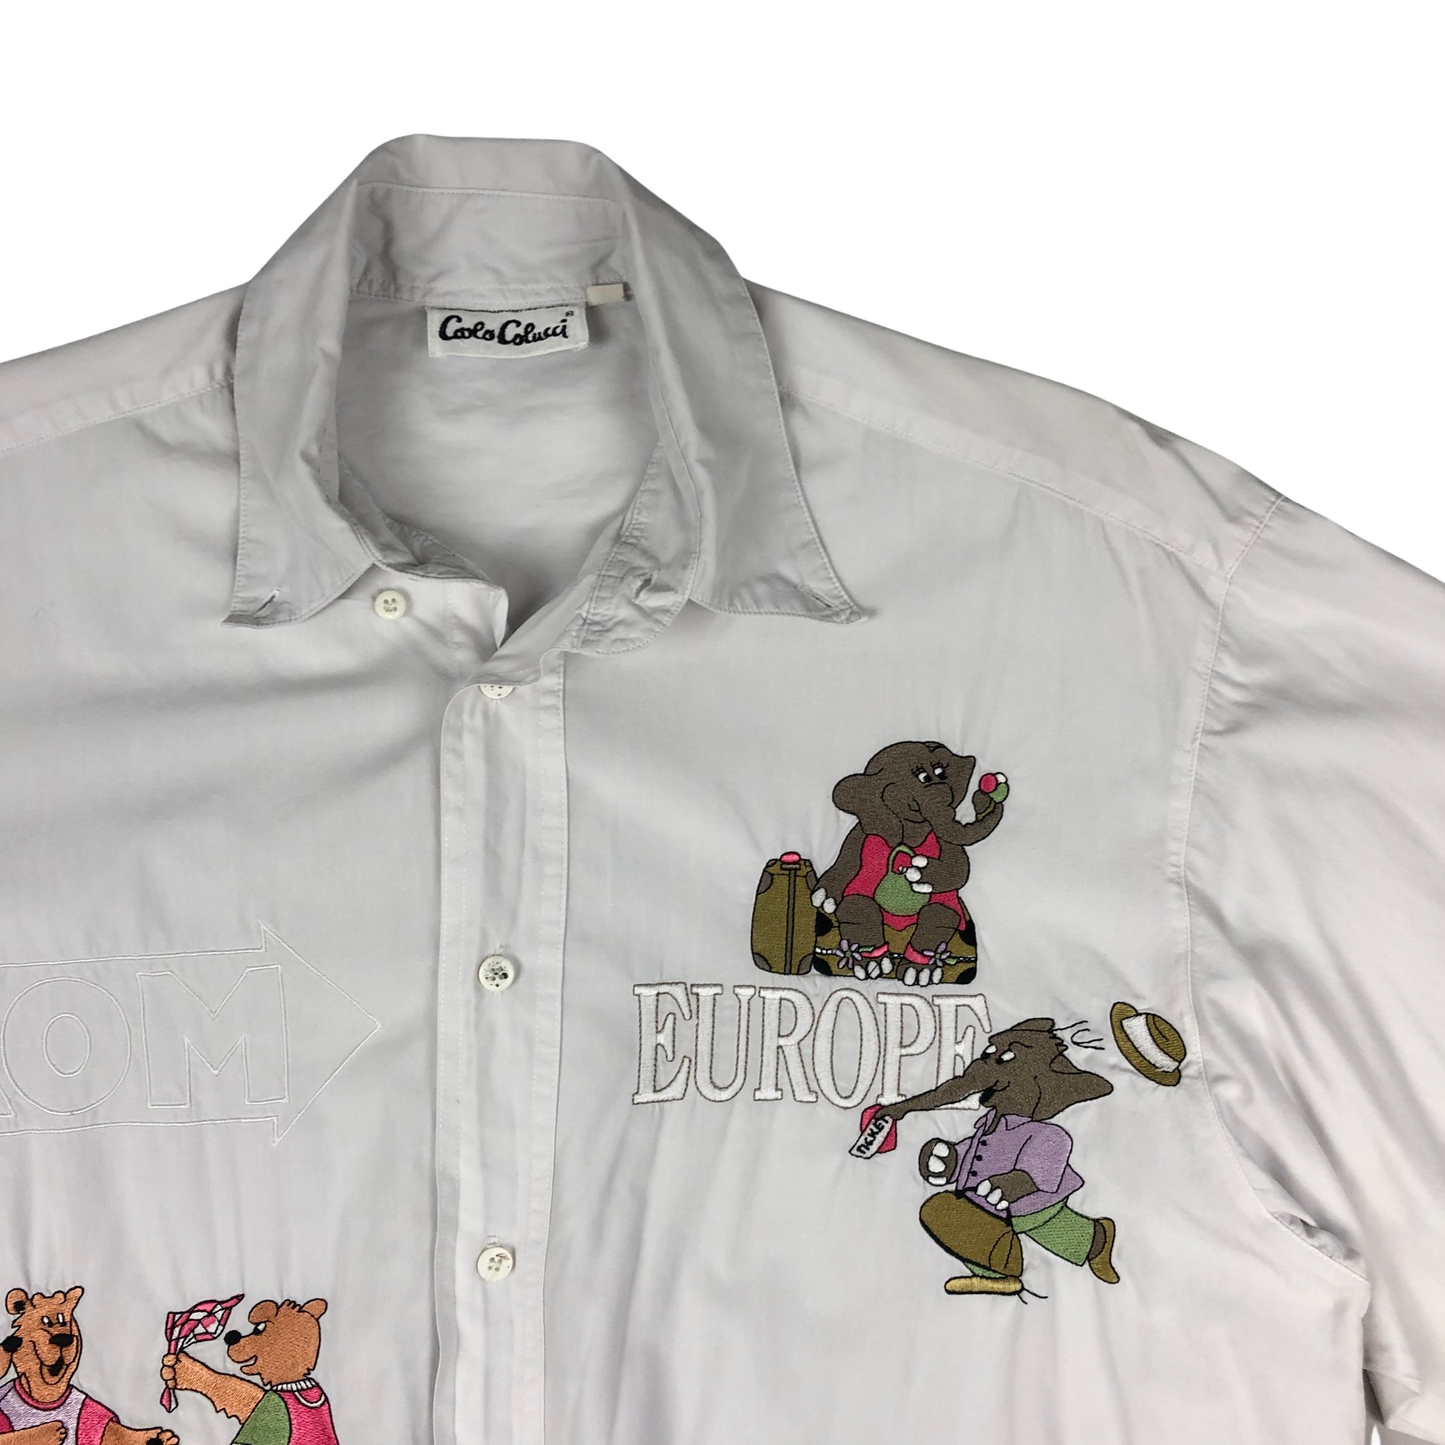 Vintage Carlo Colucci White Embroidered Shirt XL